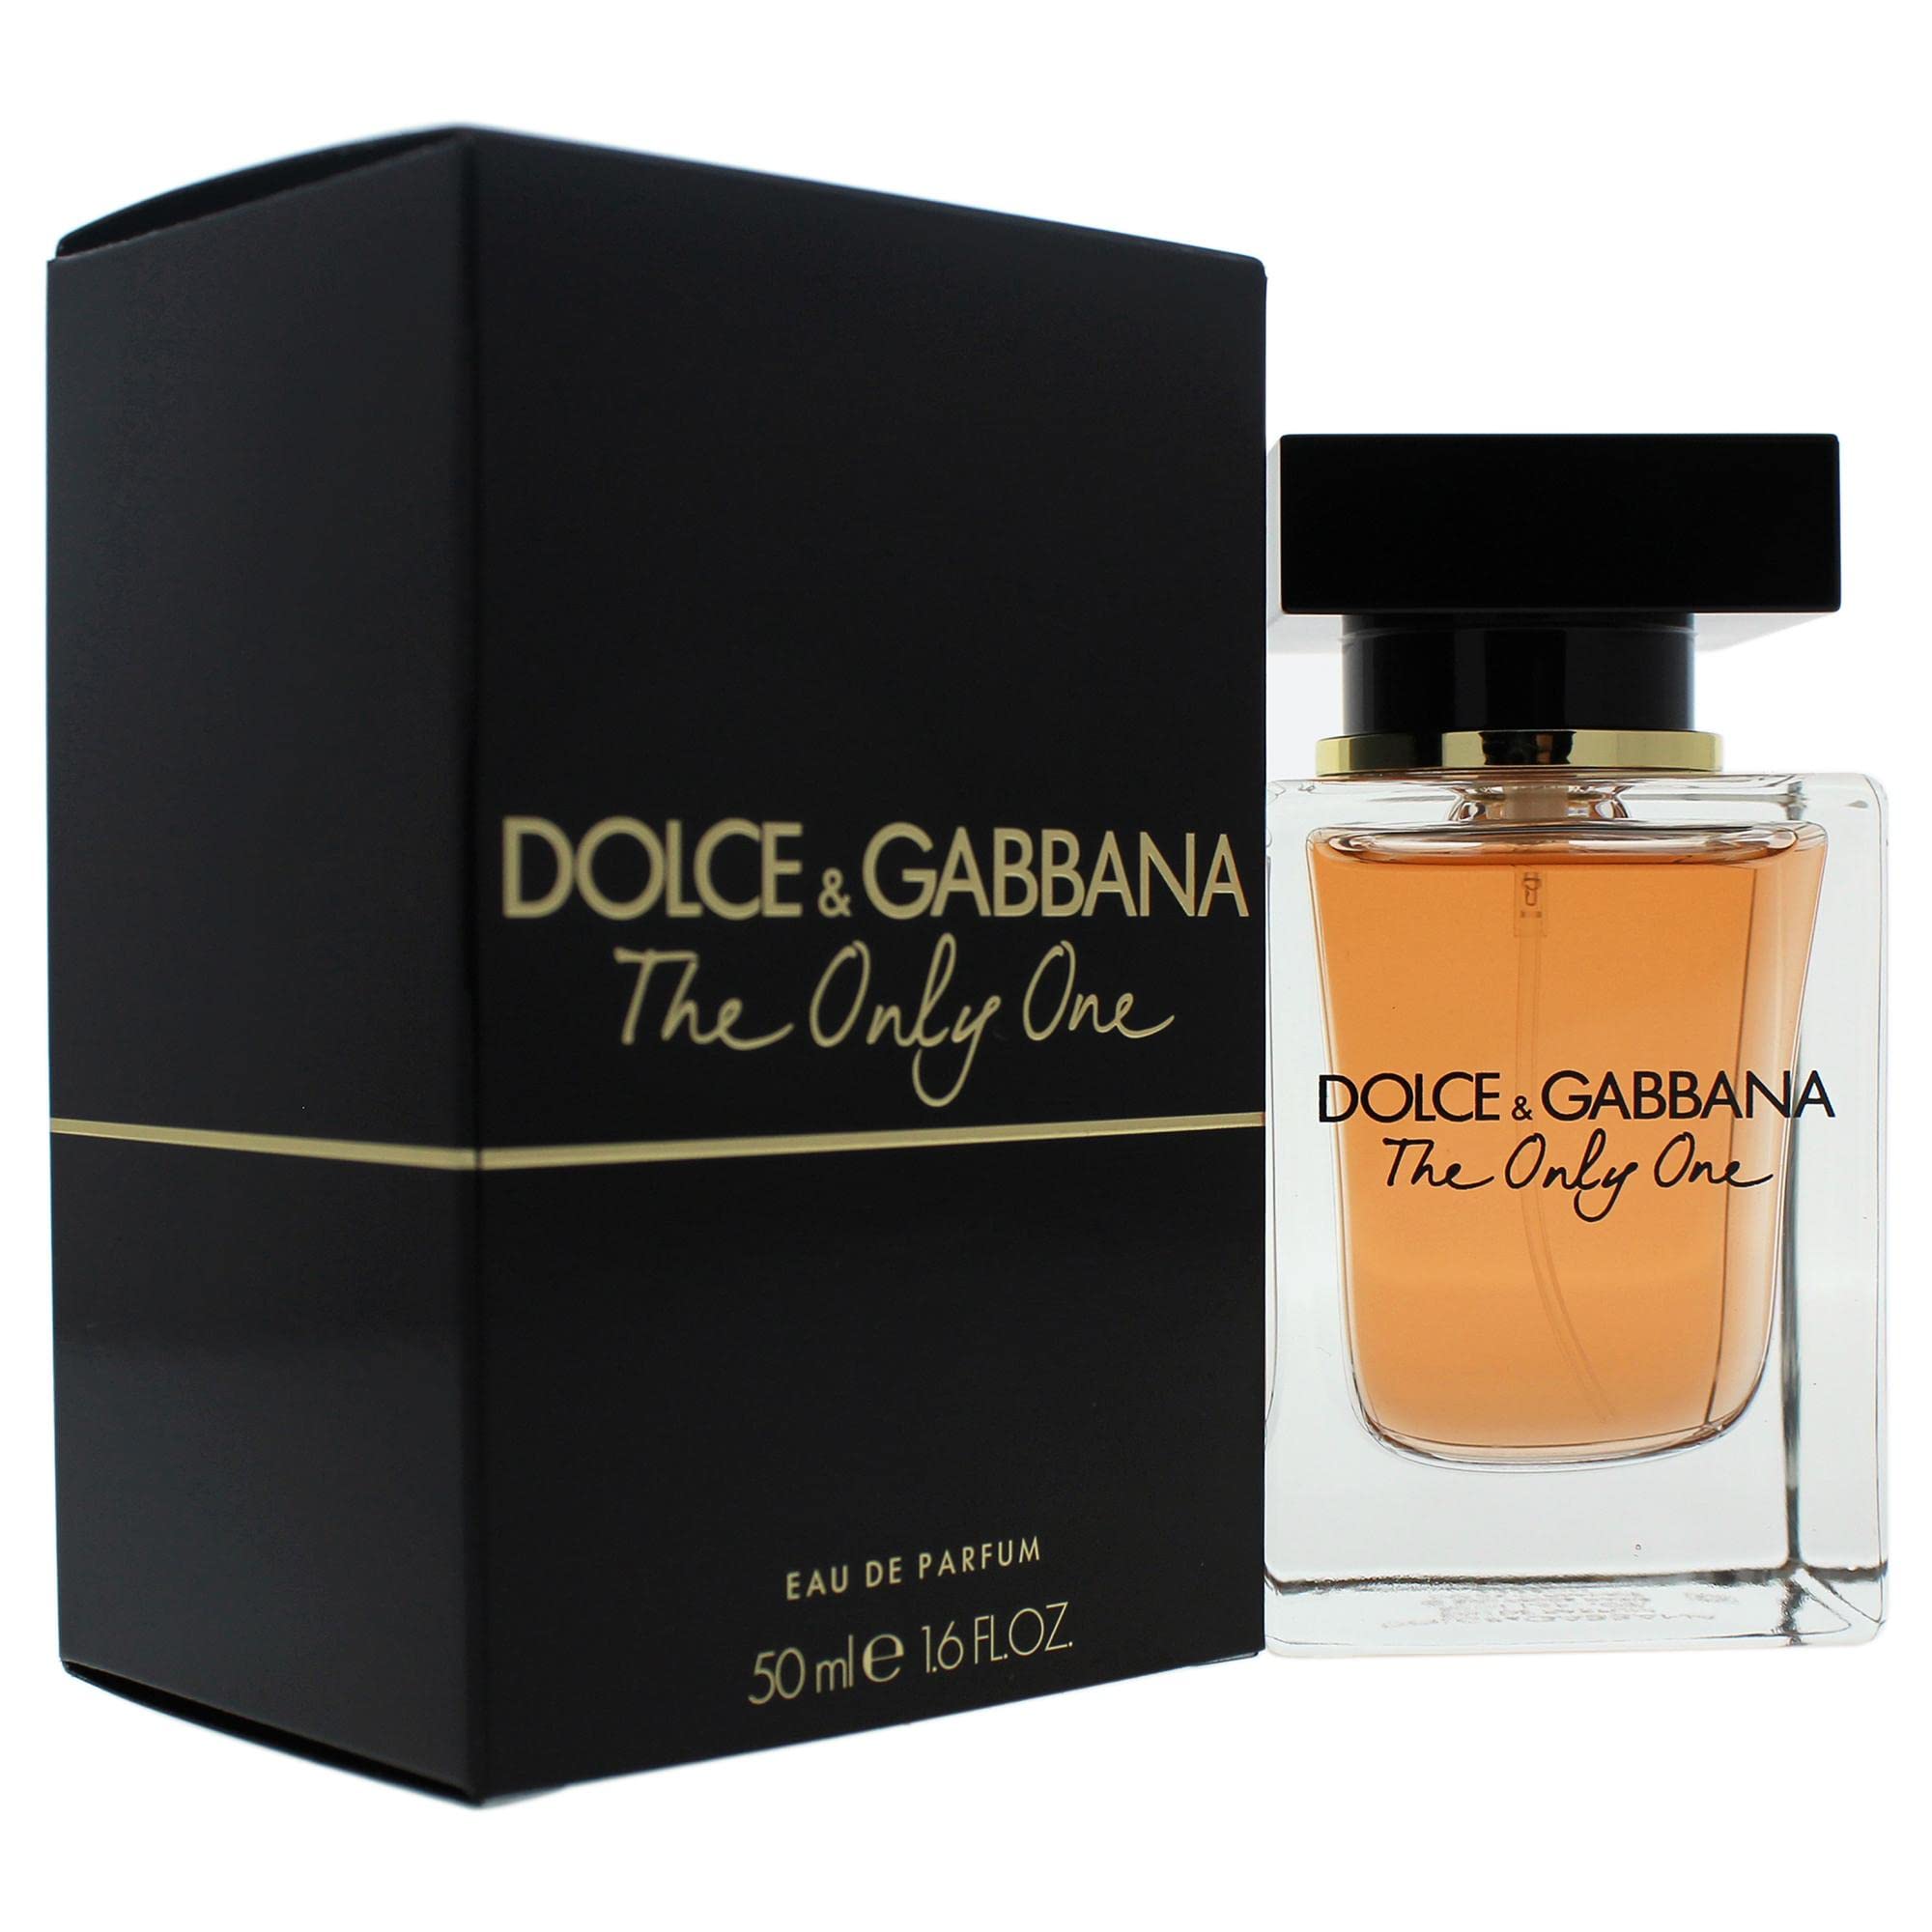 Духи dolce only one. D&G the only one Дольче Габбана. Dolce & Gabbana the only one 100 мл. Dolce Gabbana the only one мужские. Дольче Габбана the only one женские.